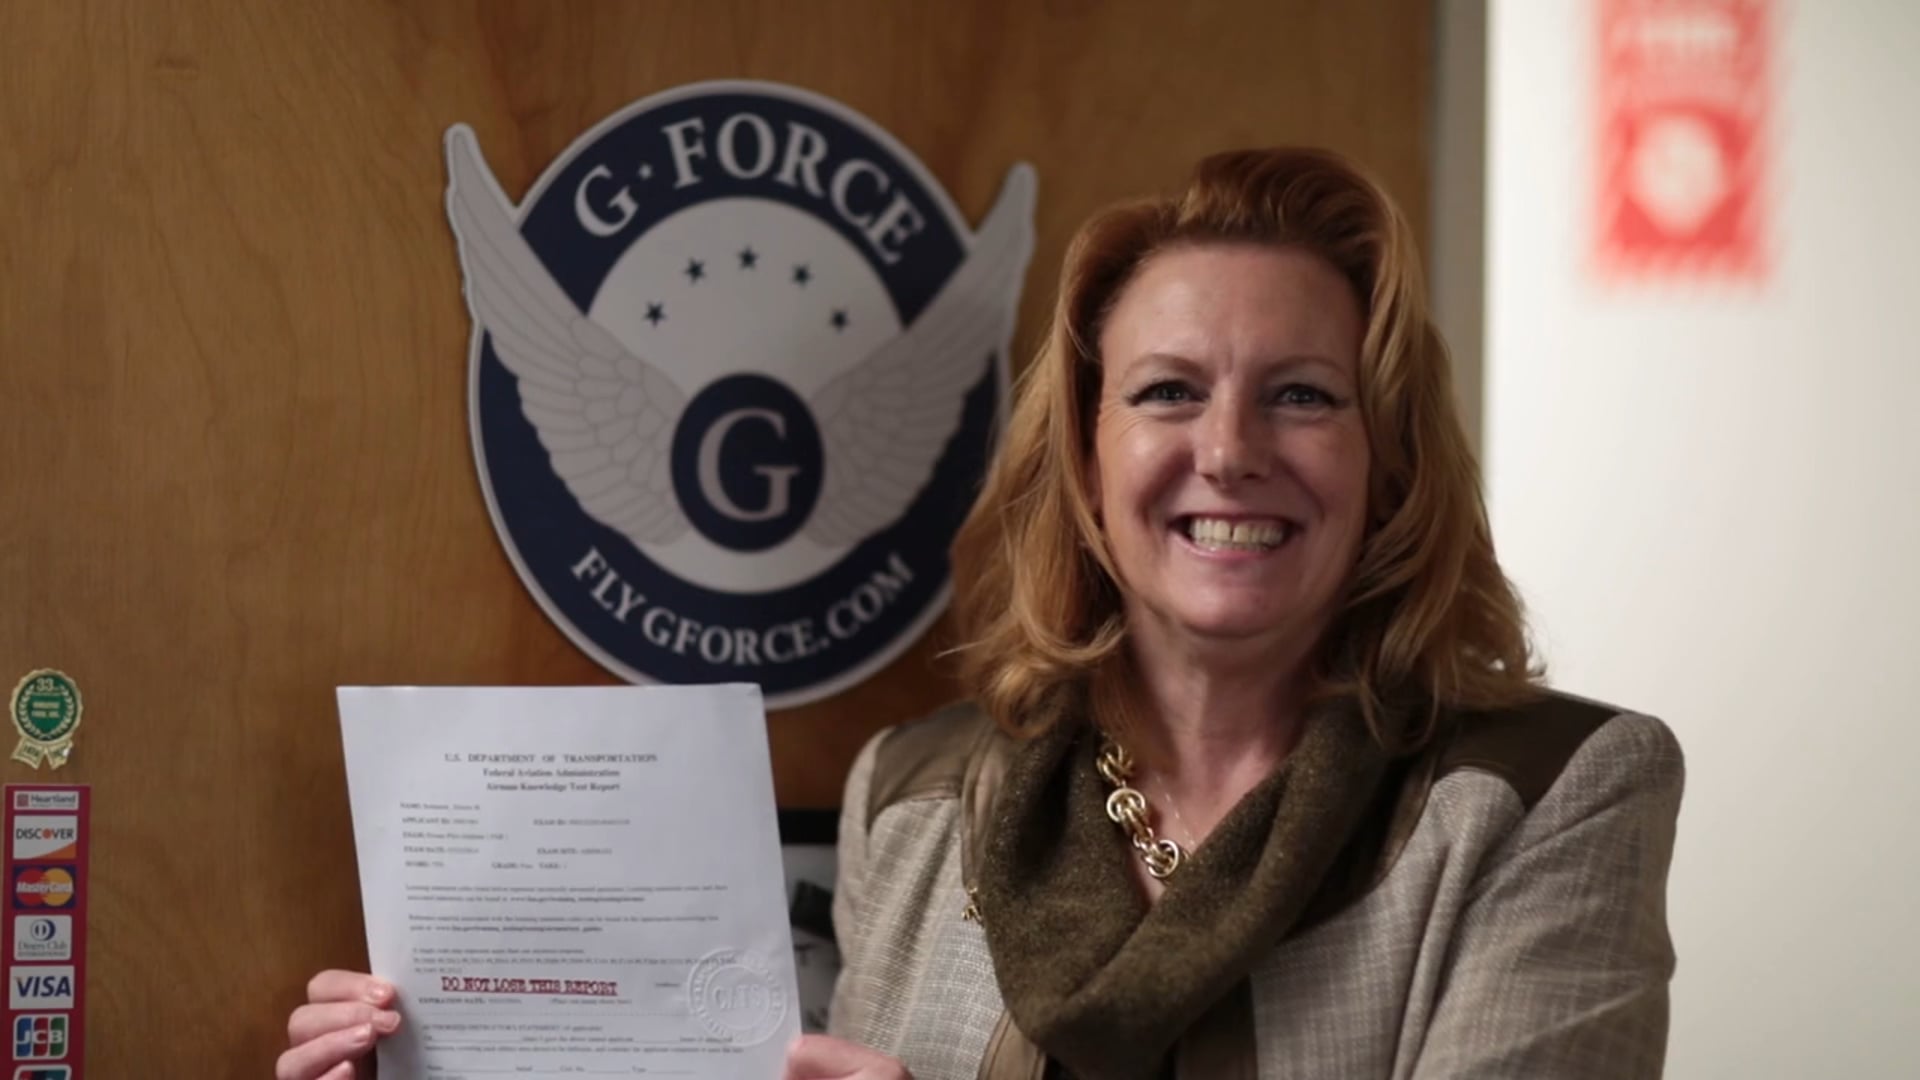 Fly G-Force: Denise's Story